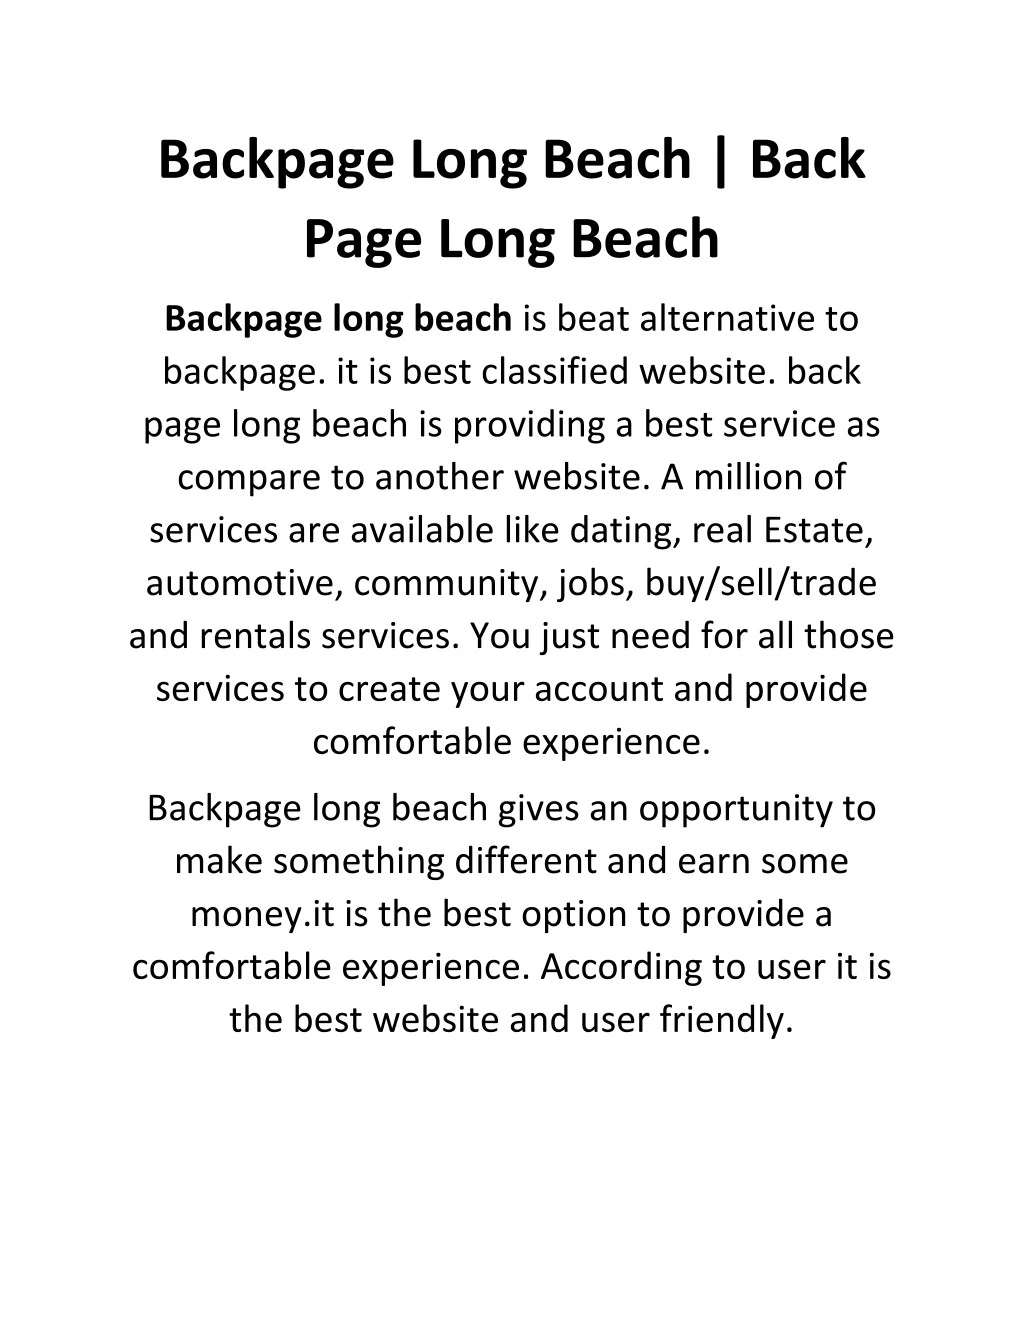 backpage long beach back page long beach